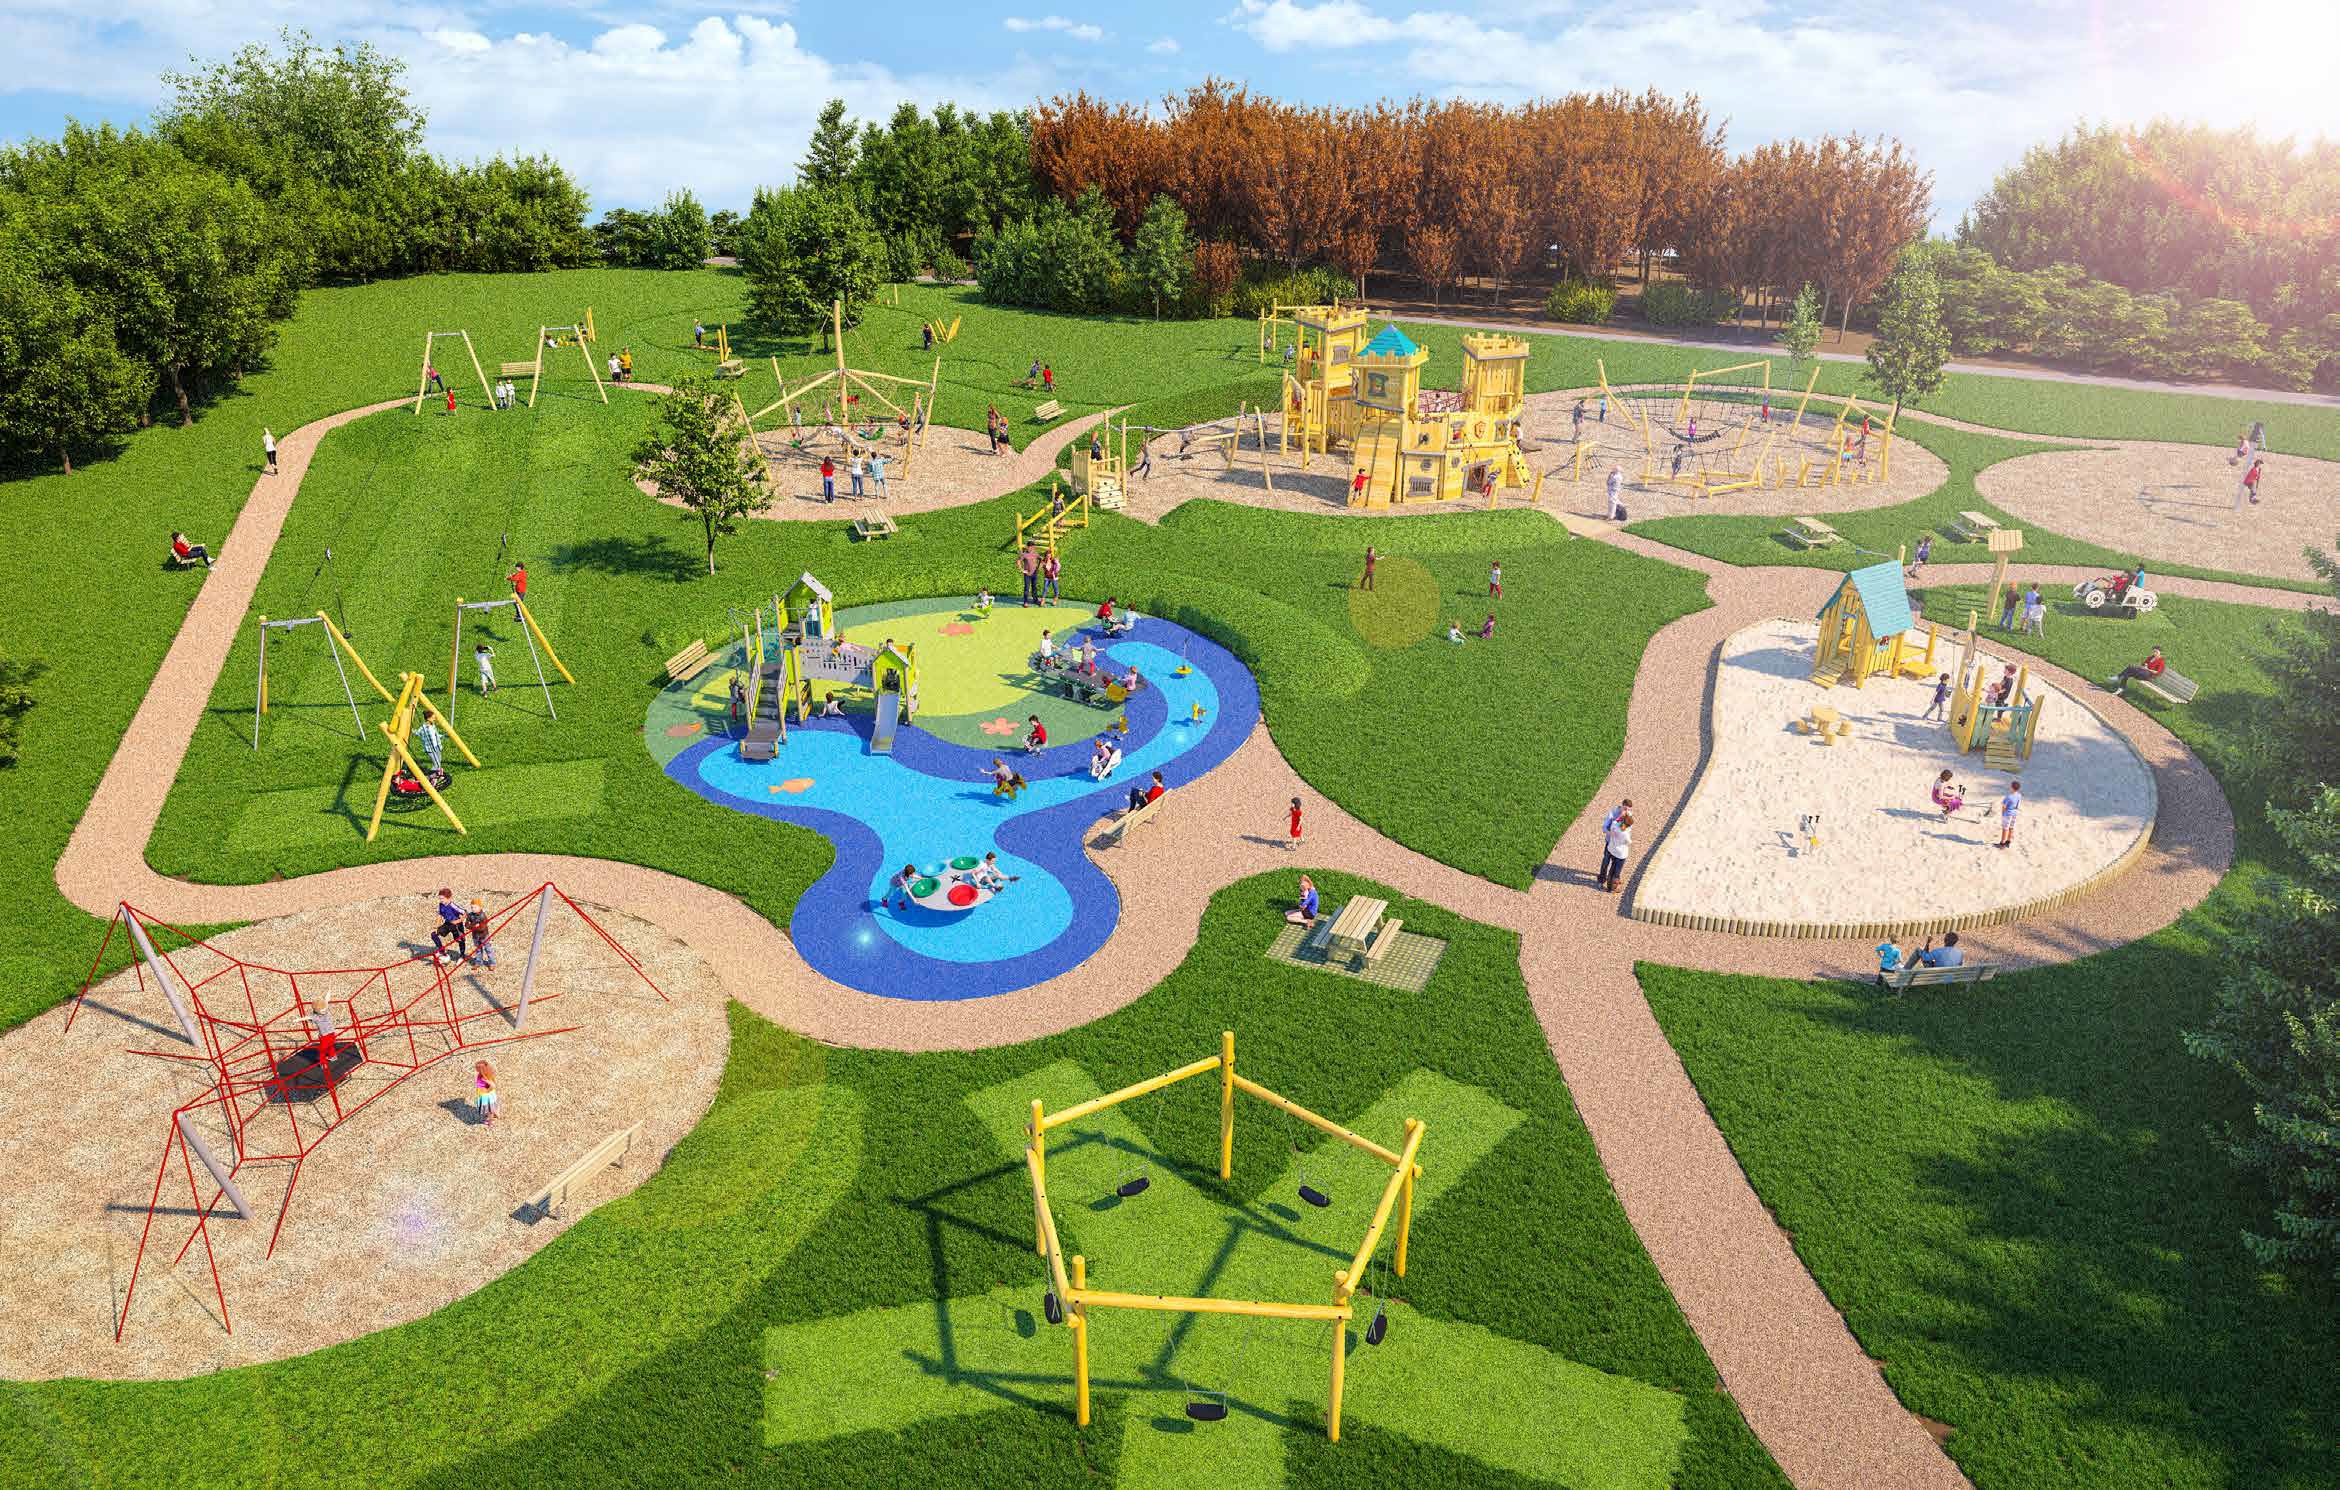 The plans unveiled for the new playpark which is scheduled to be ready by August this year.